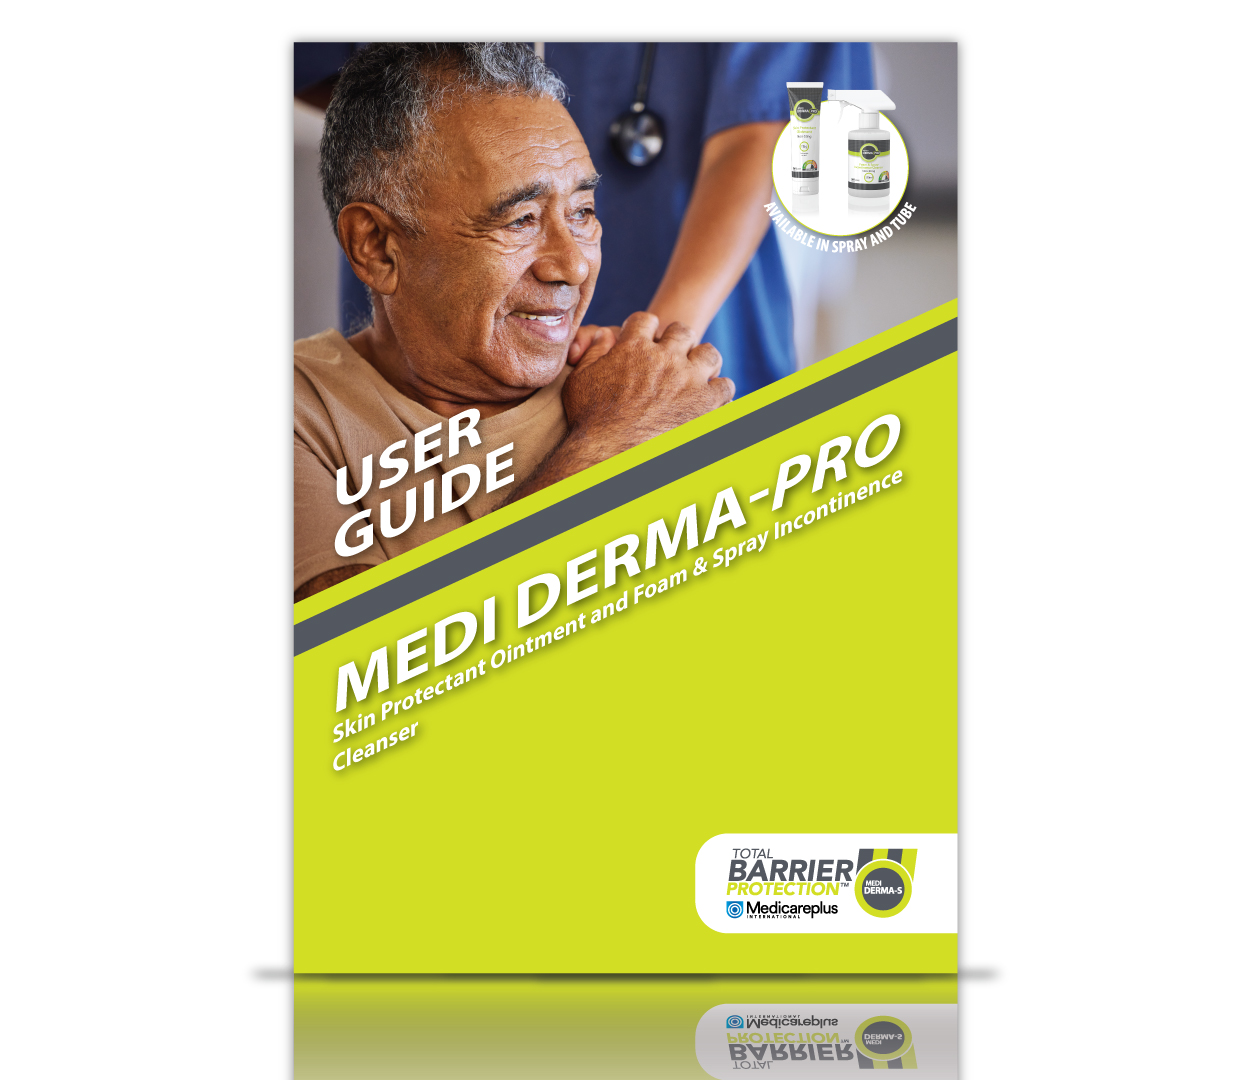 User Guide - Medi Derma-PRO Skin Protectant Ointment & Incontinence Cleanser